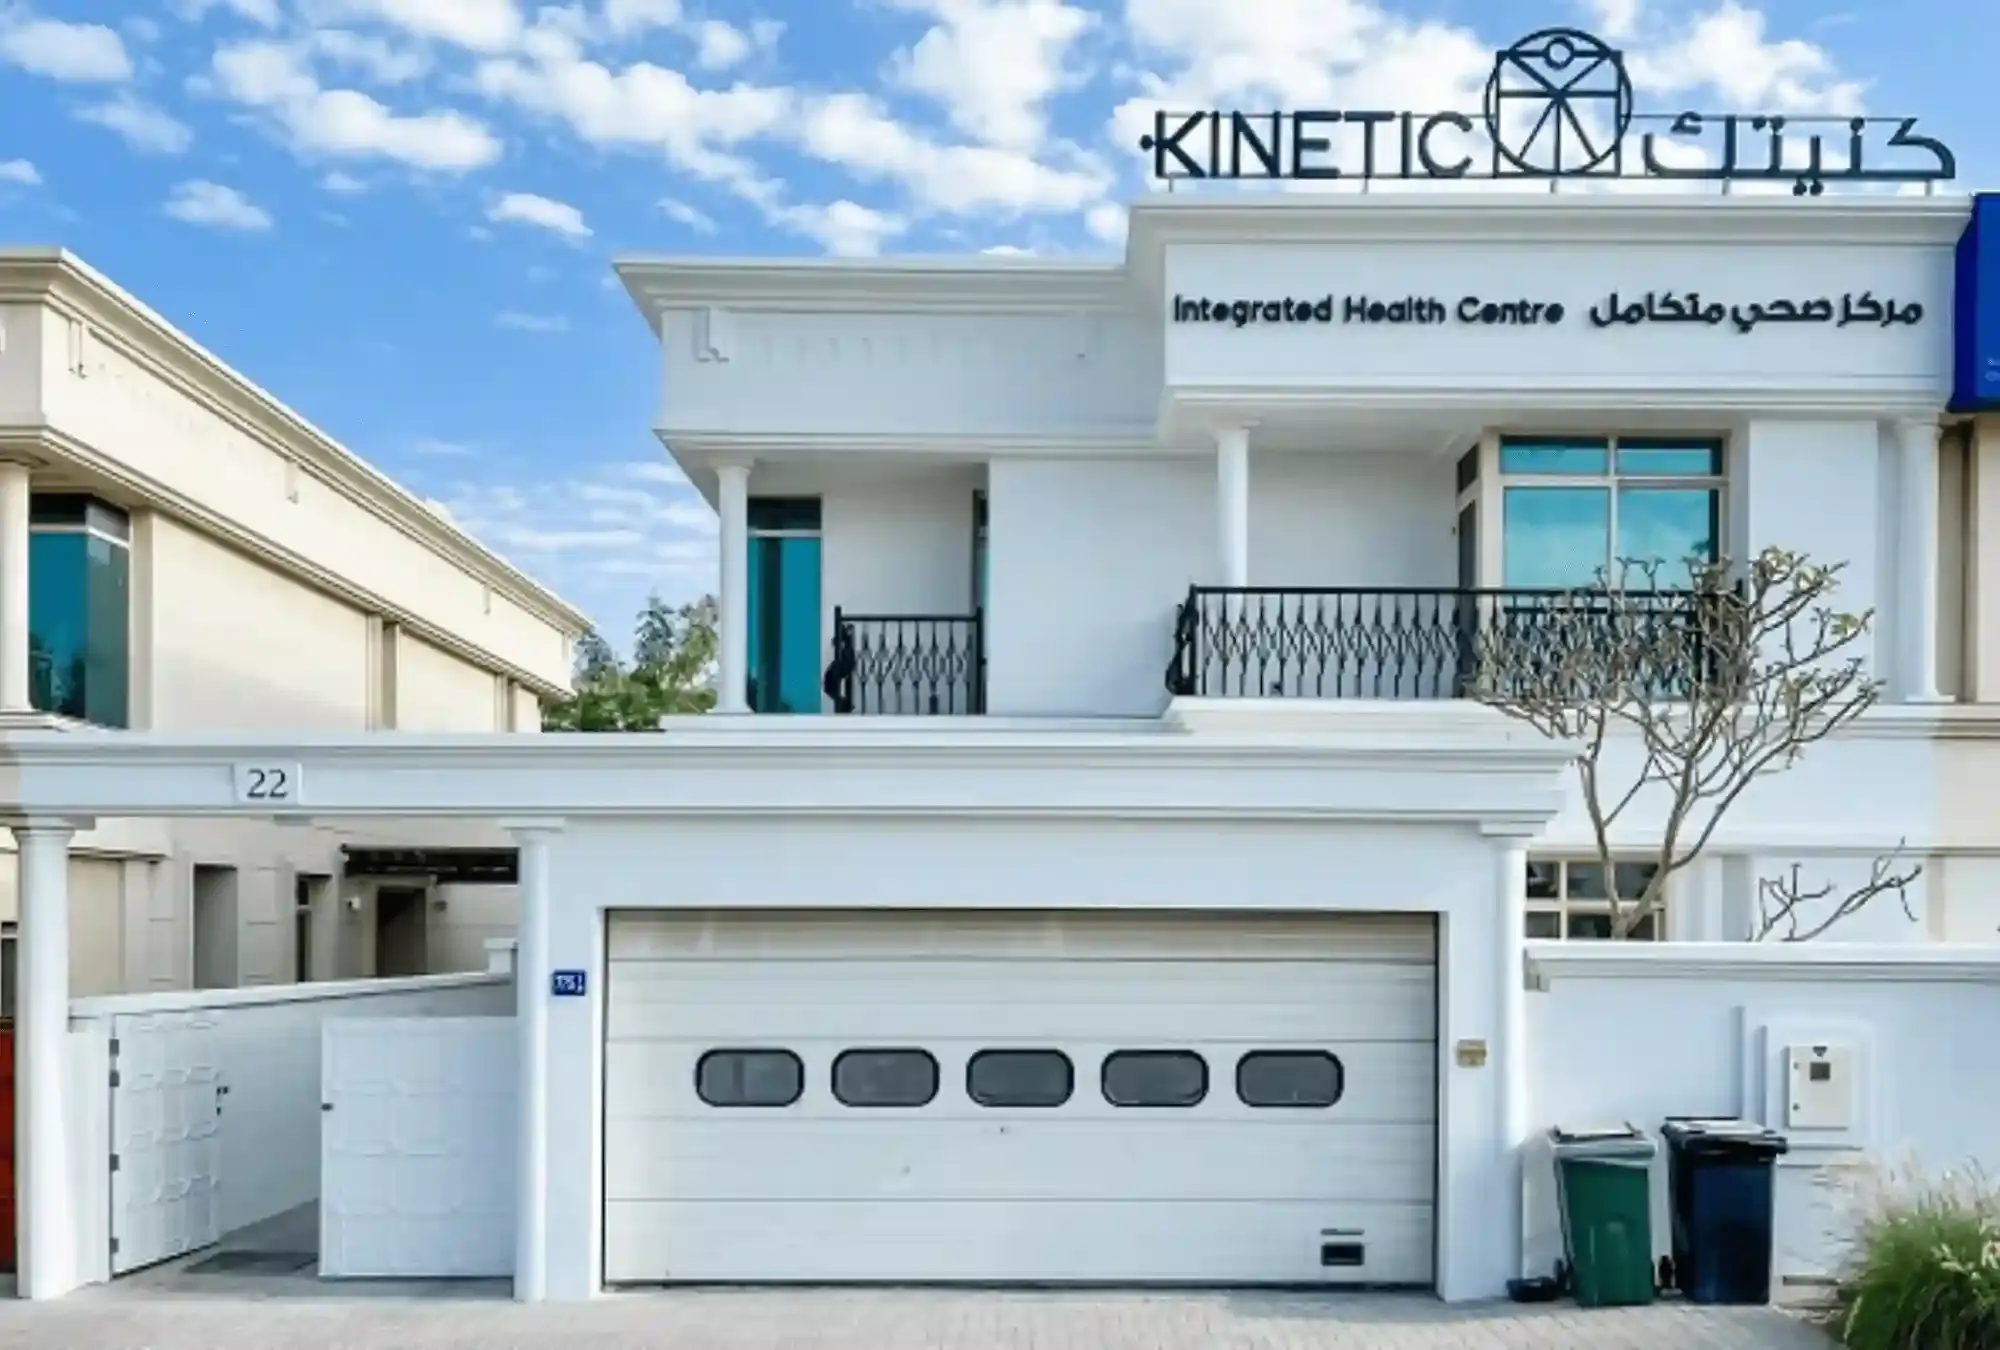 kinetic---integrated-health-centre-1694178905